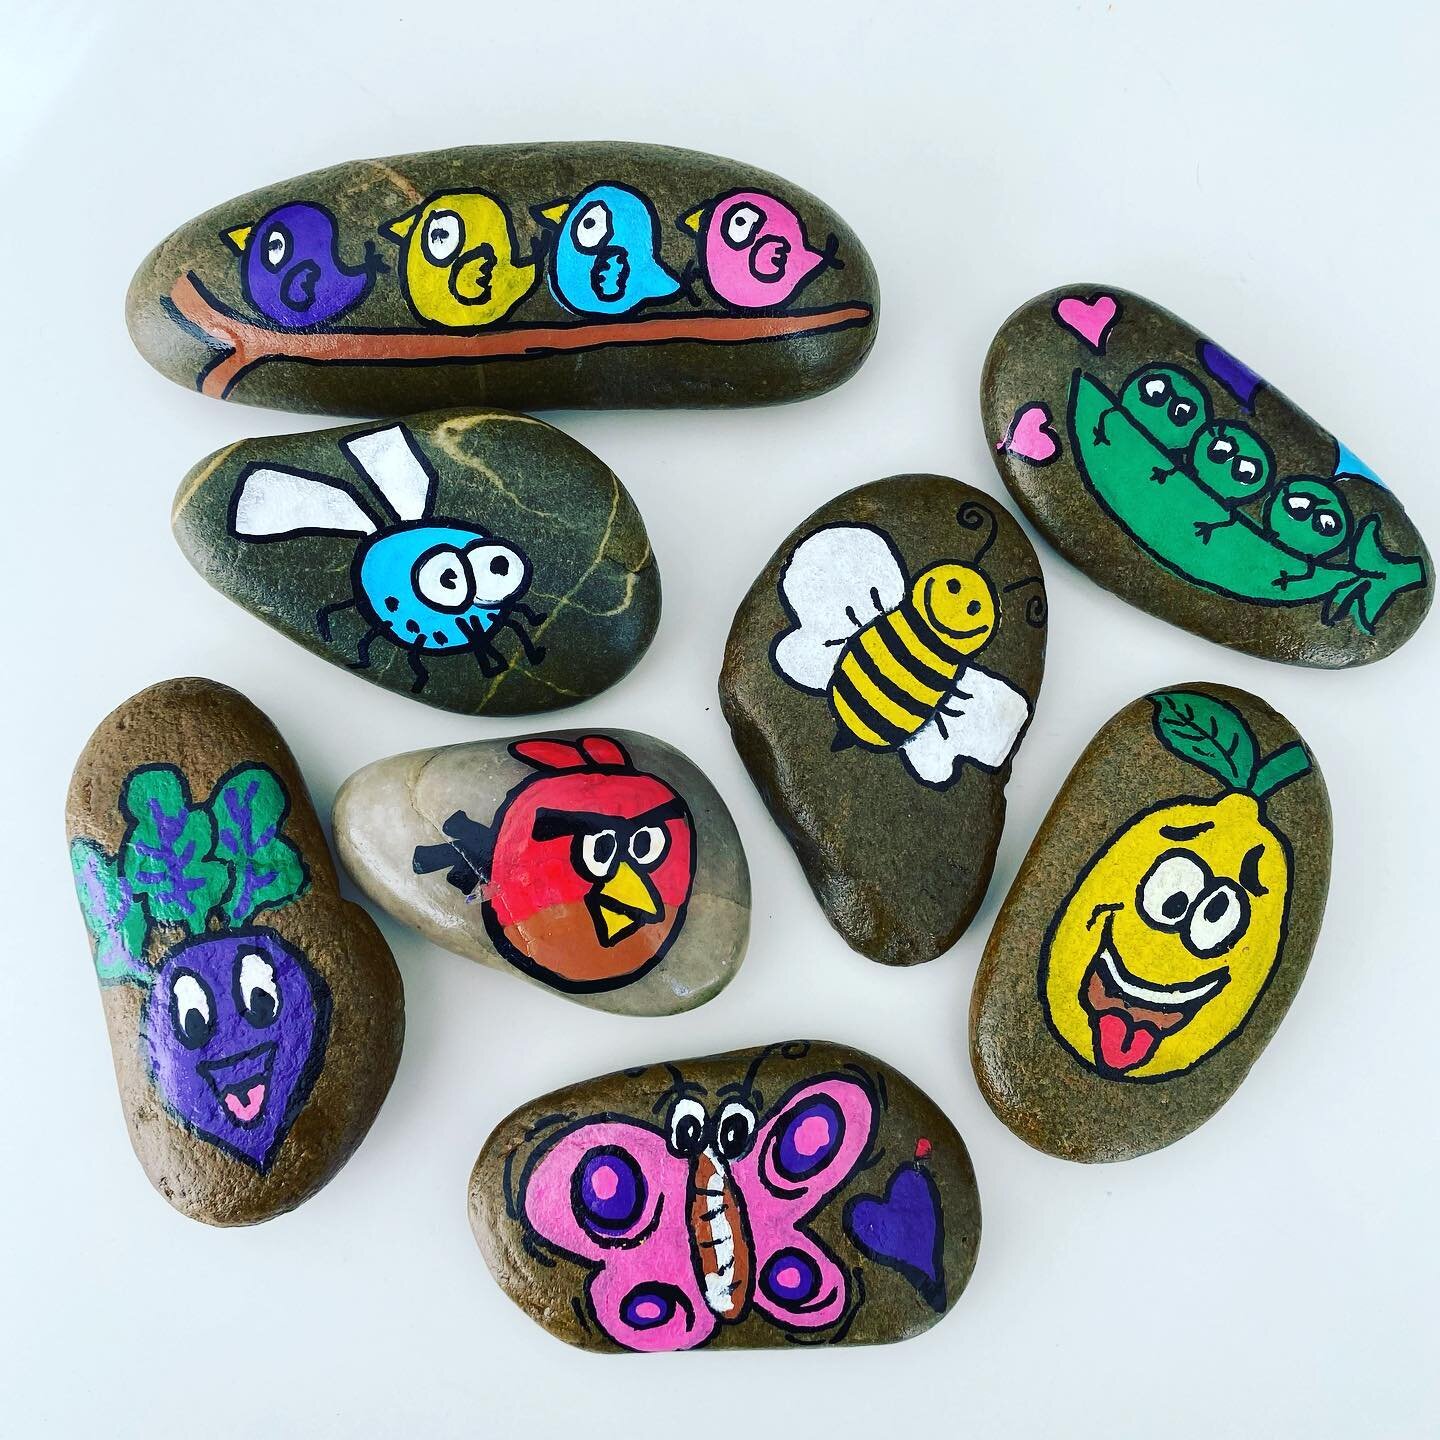 New rocks to be hidden in the garden on the weekend. Come find them and re-hide them back in the garden.  #nbsr #newport2106 #community #funforkids